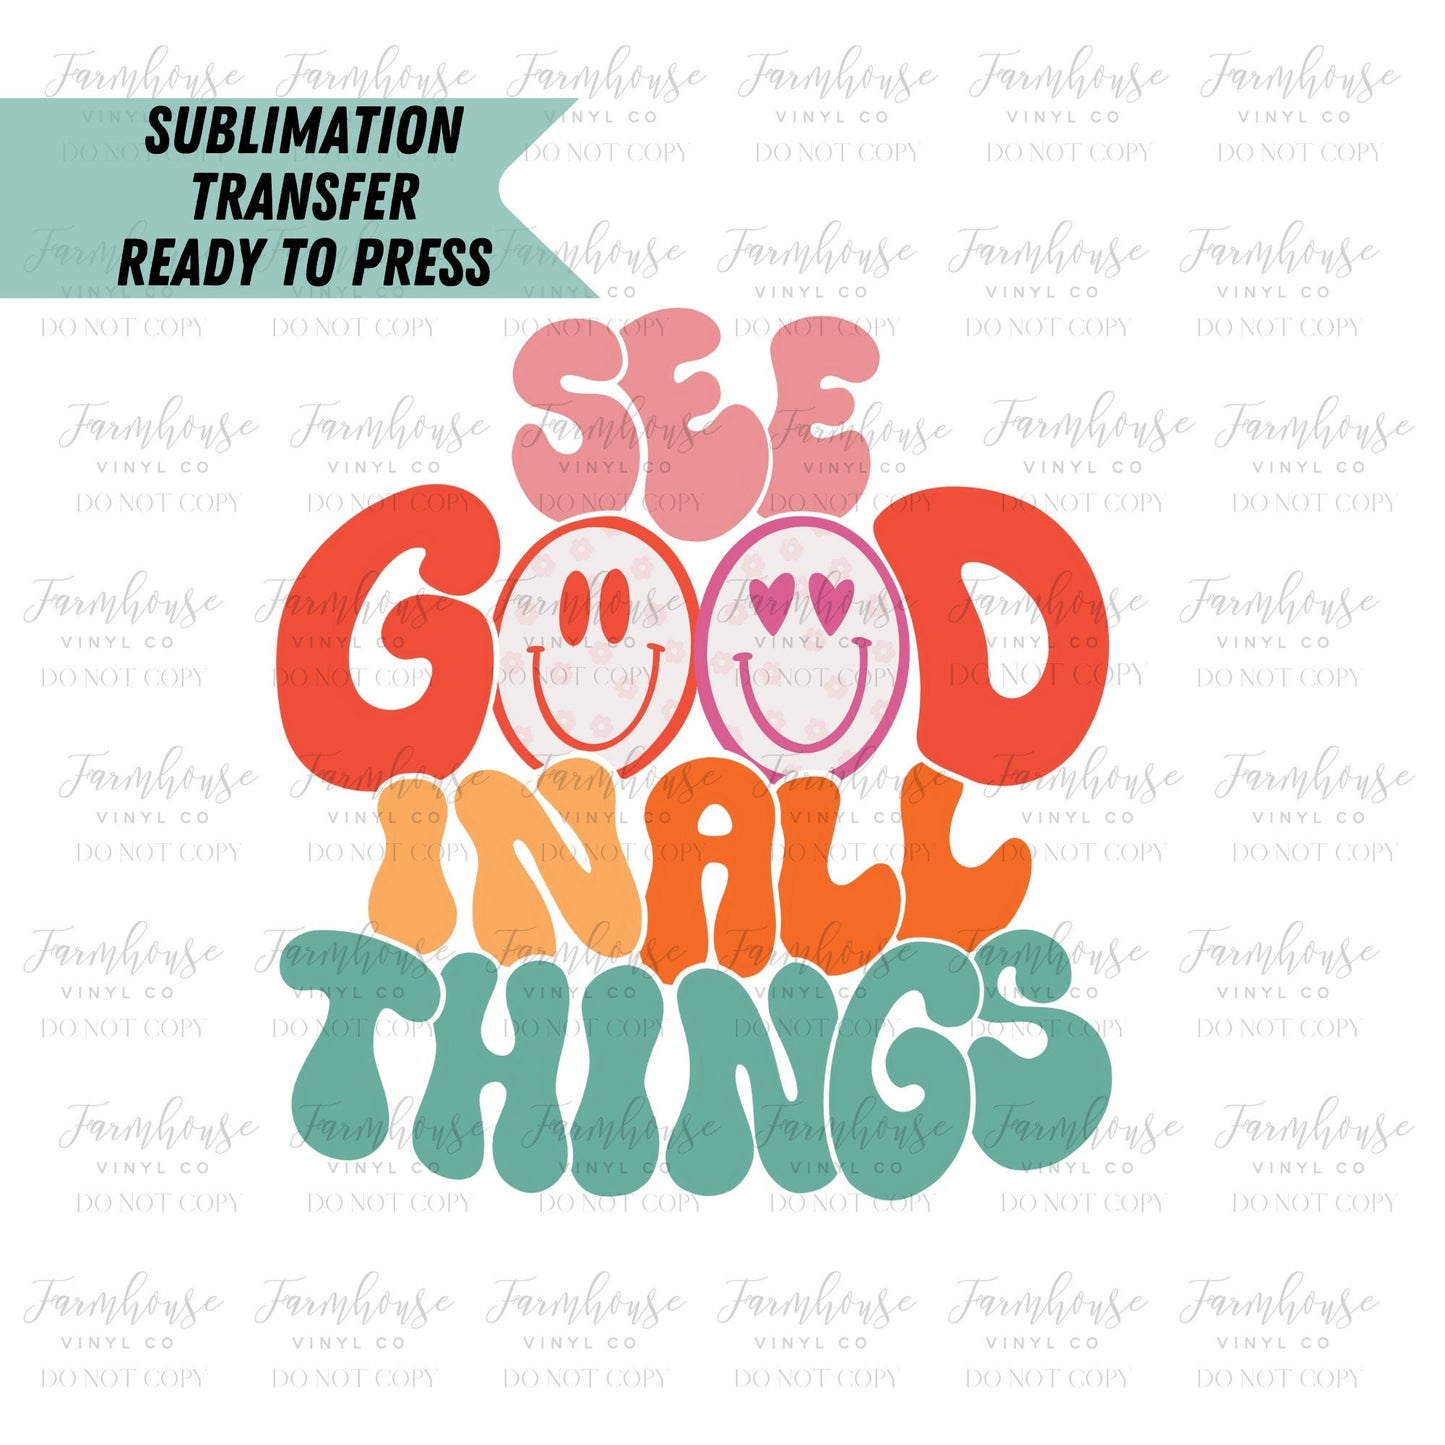 See Good in All Things, Ready To Press, Sublimation Transfers, Sublimation, Transfer Ready To Press, Heat Transfer Design Retro Hip - Farmhouse Vinyl Co